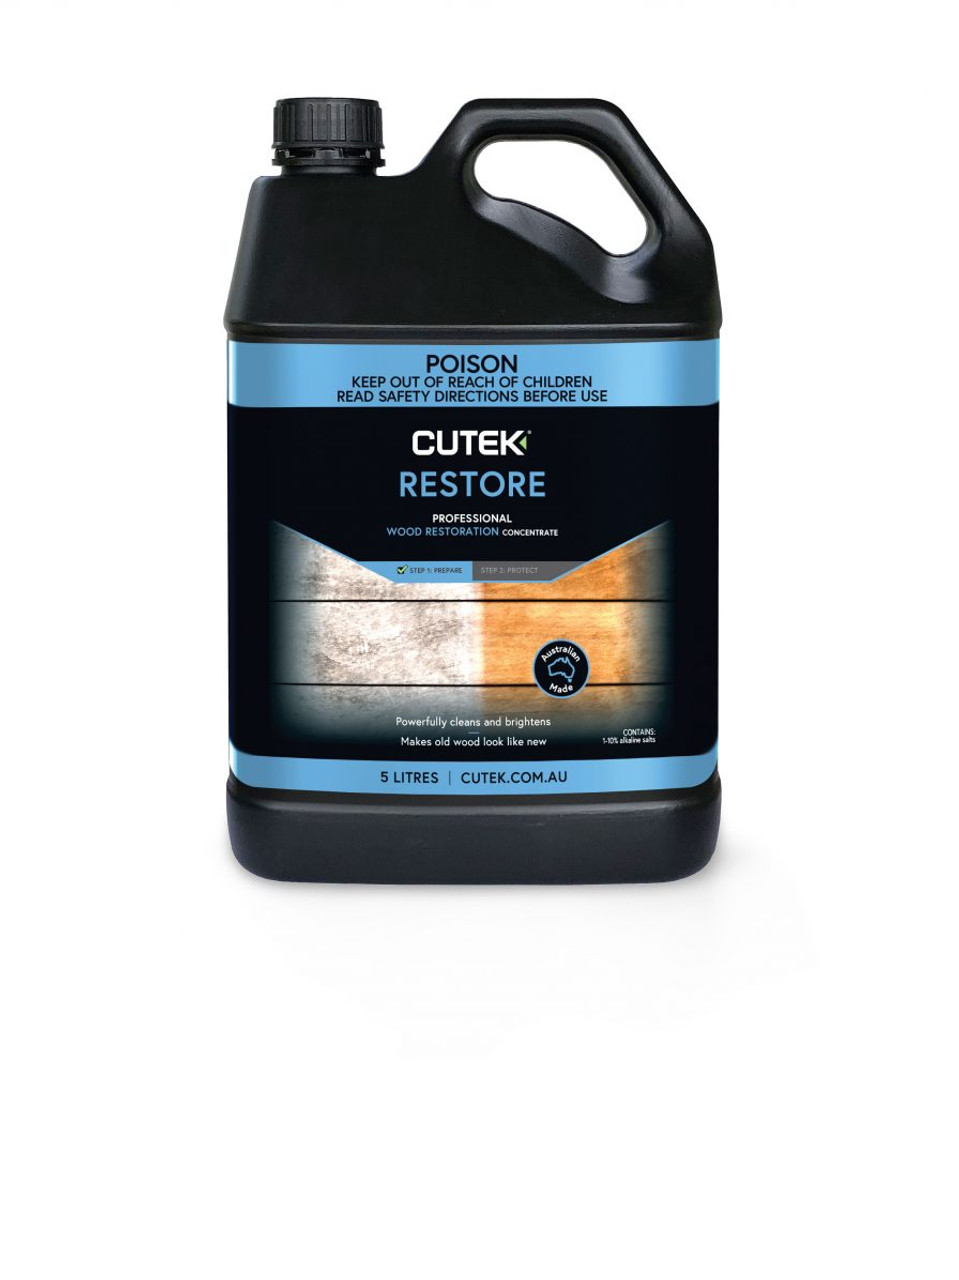 CUTEK Cleaner  Restore with  for CUTEK Cleaner | Restore Professional Cleaner Drum that have  available in Australia and New Zealand